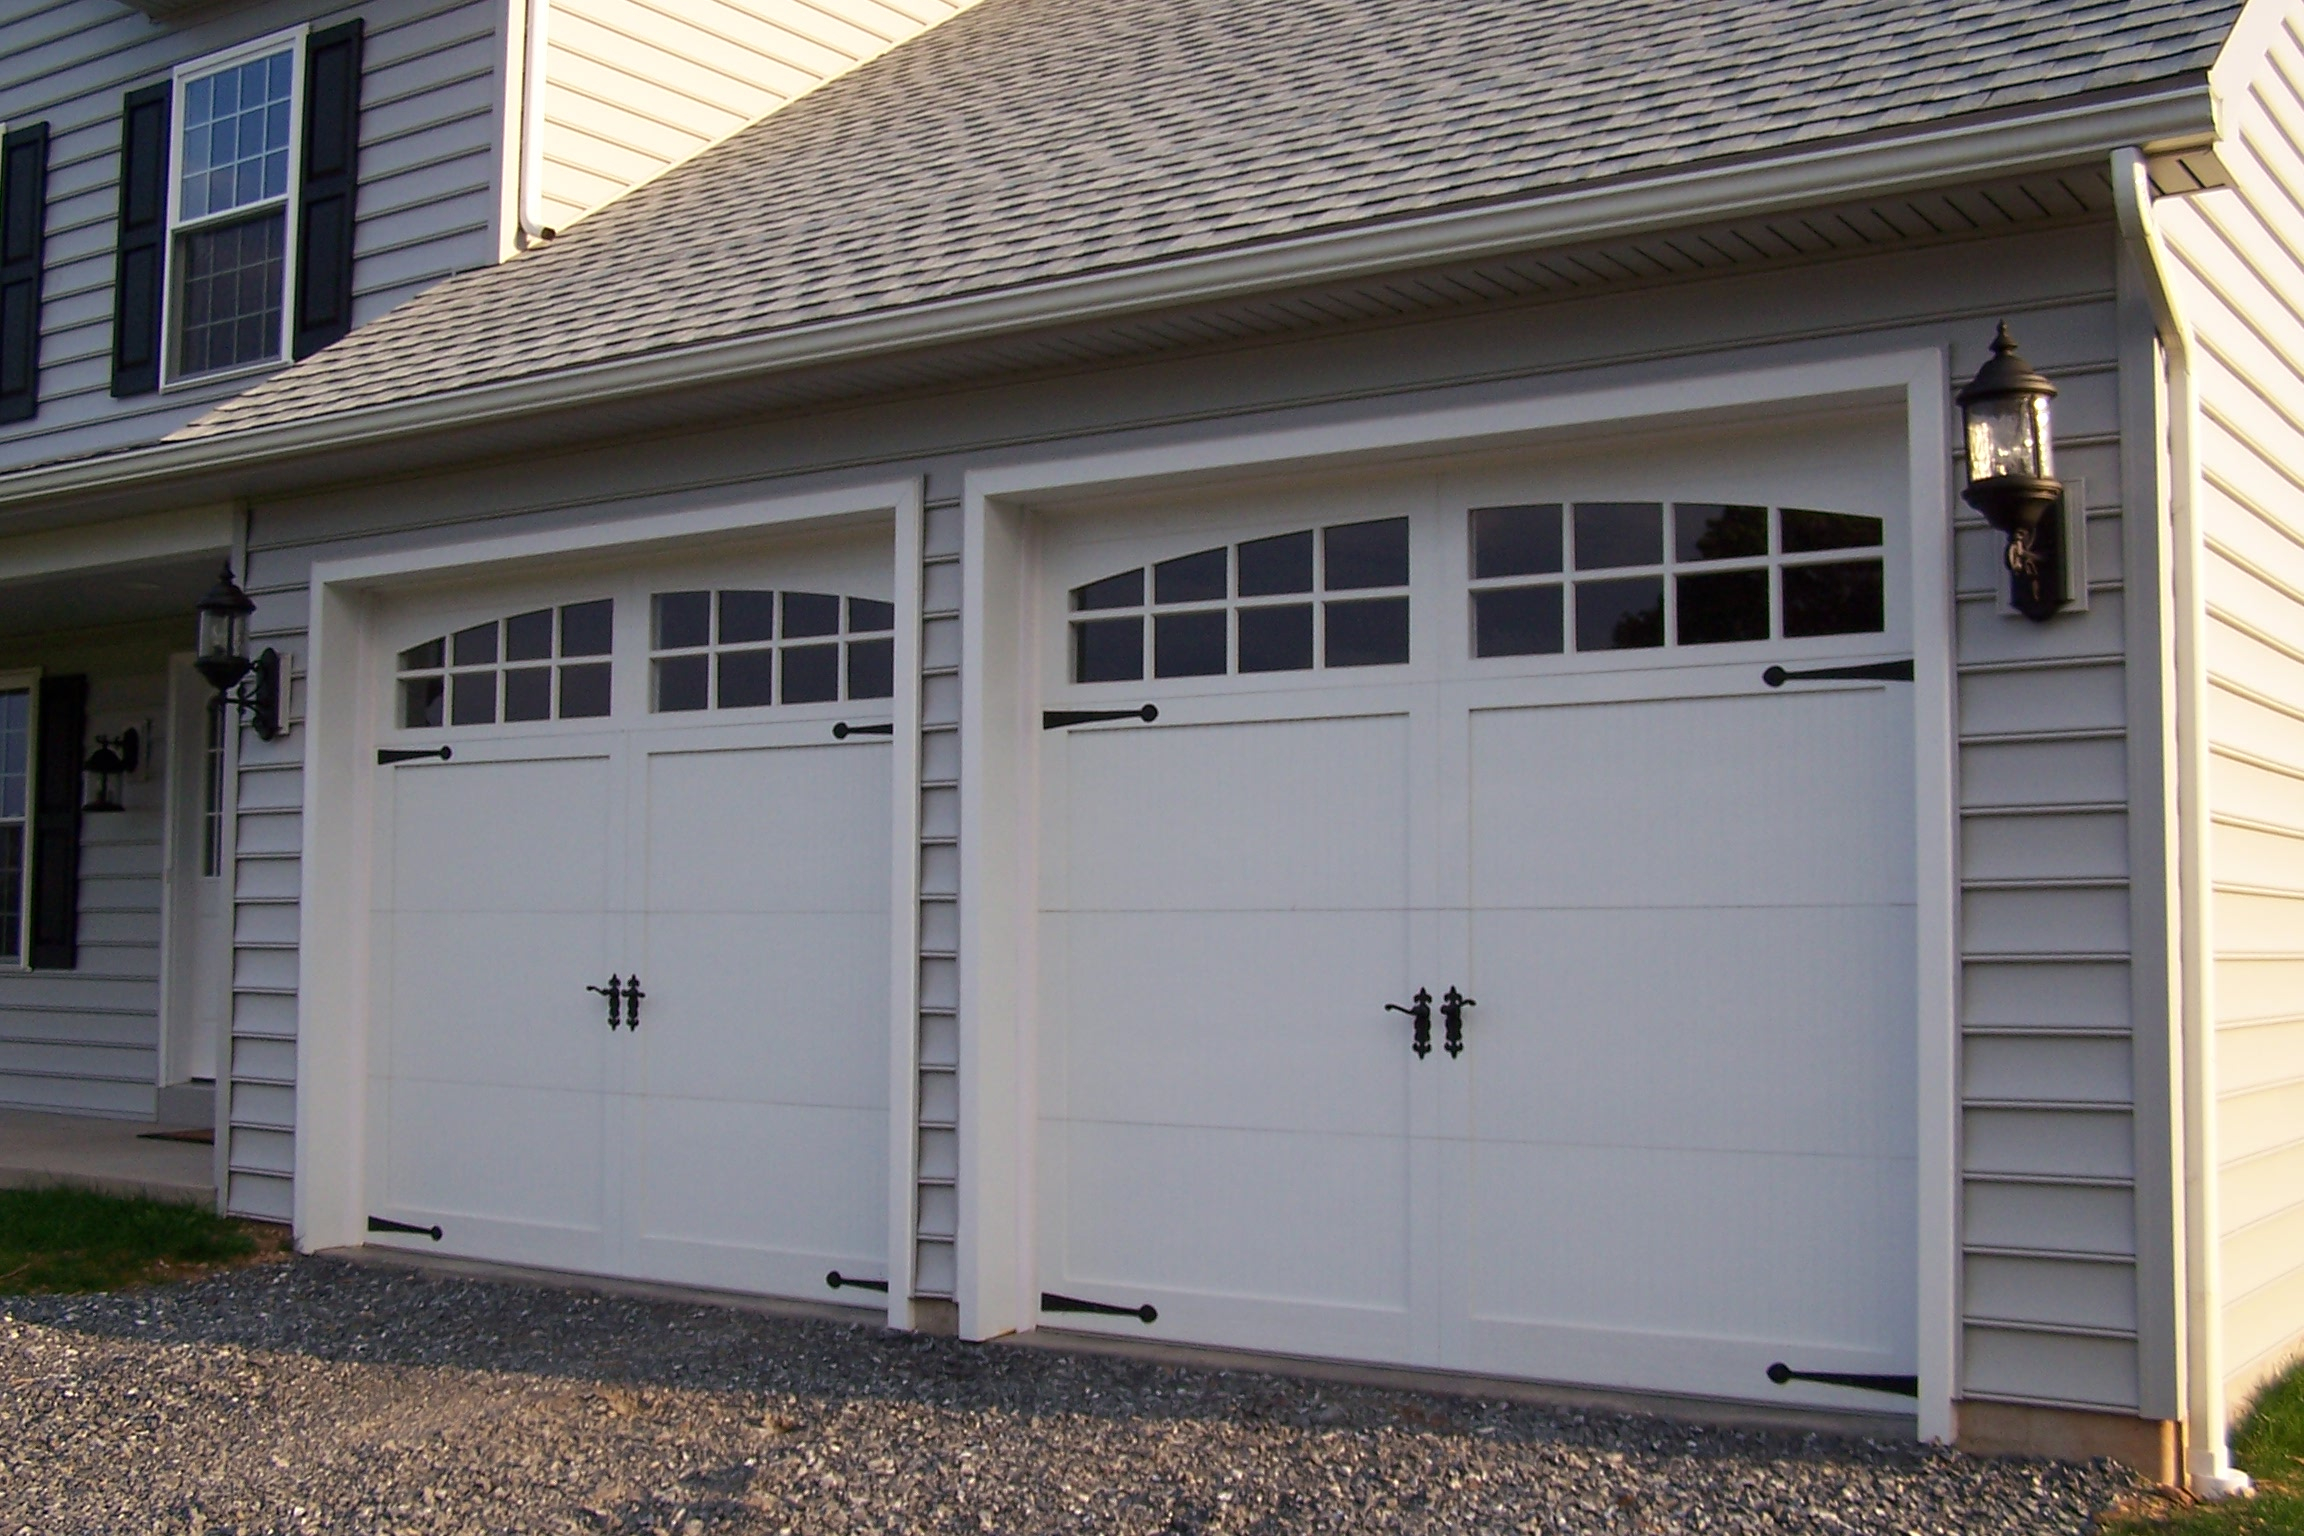 Filesectional Type Overhead Garage Door Wikipedia throughout dimensions 2304 X 1536